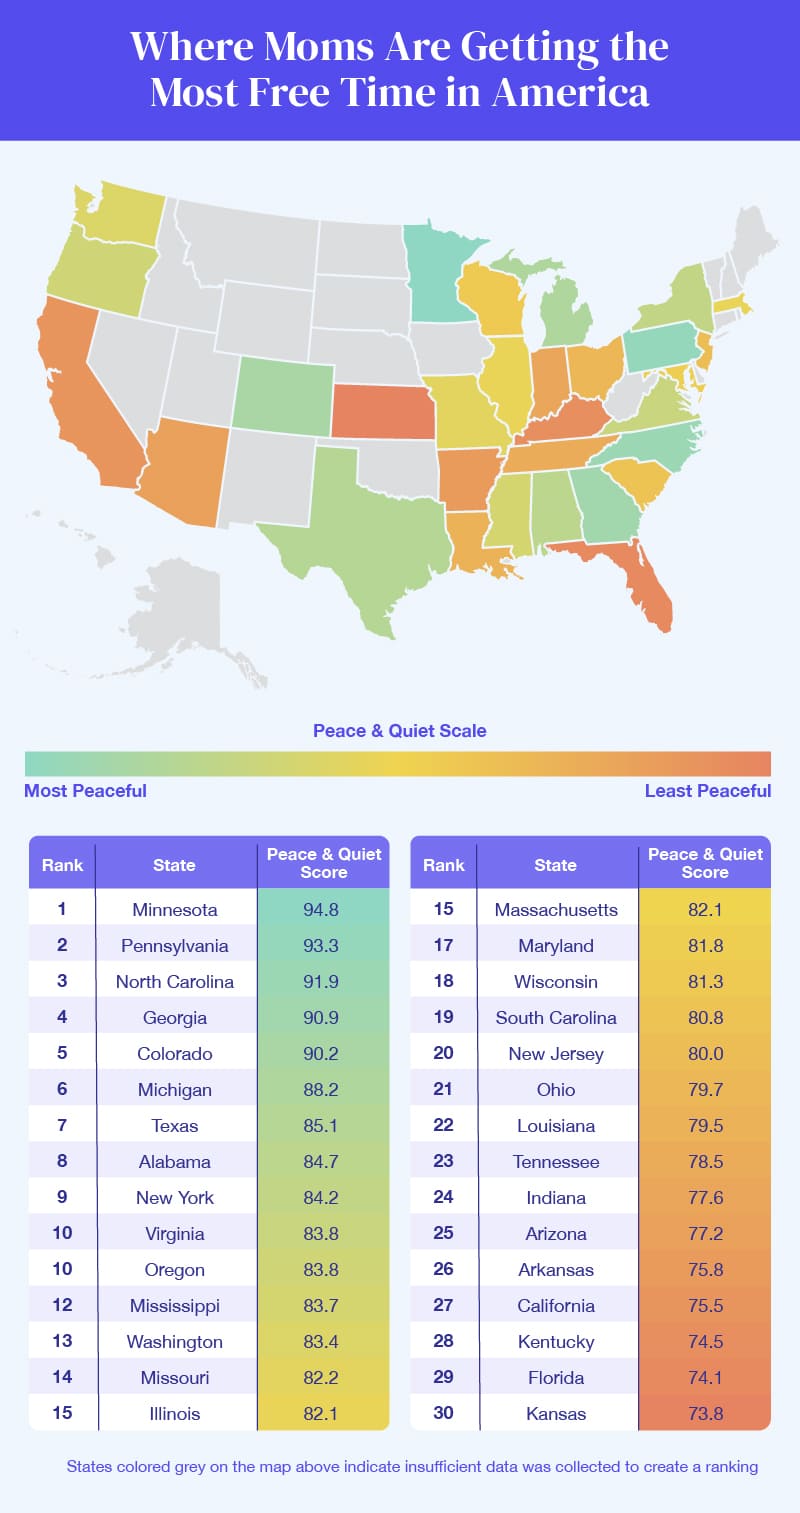 A U.S. heatmap showing the states where moms get the most and least time to themselves 